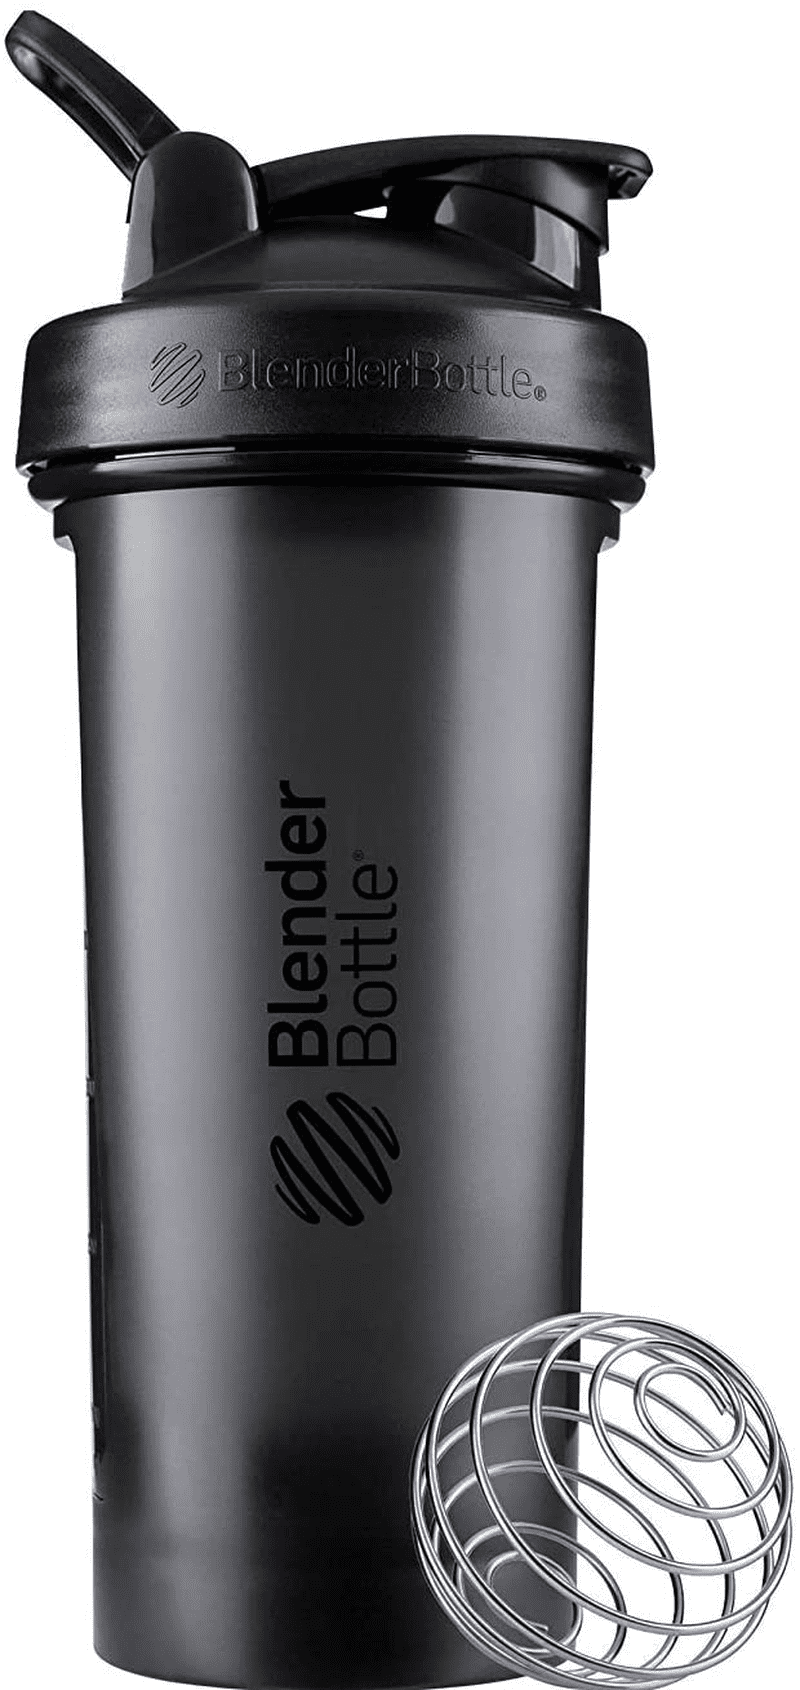  Shaker Bottle A Small Dark Black 12Oz/400ml w. Measurement  Marks & Stainless Whisk Blender Mixer Ball,BPA Free,Made of PP5,-4~248  °F,Perfect for Nutrition/Protein/Keto/Juice Powder Shaking : Home & Kitchen